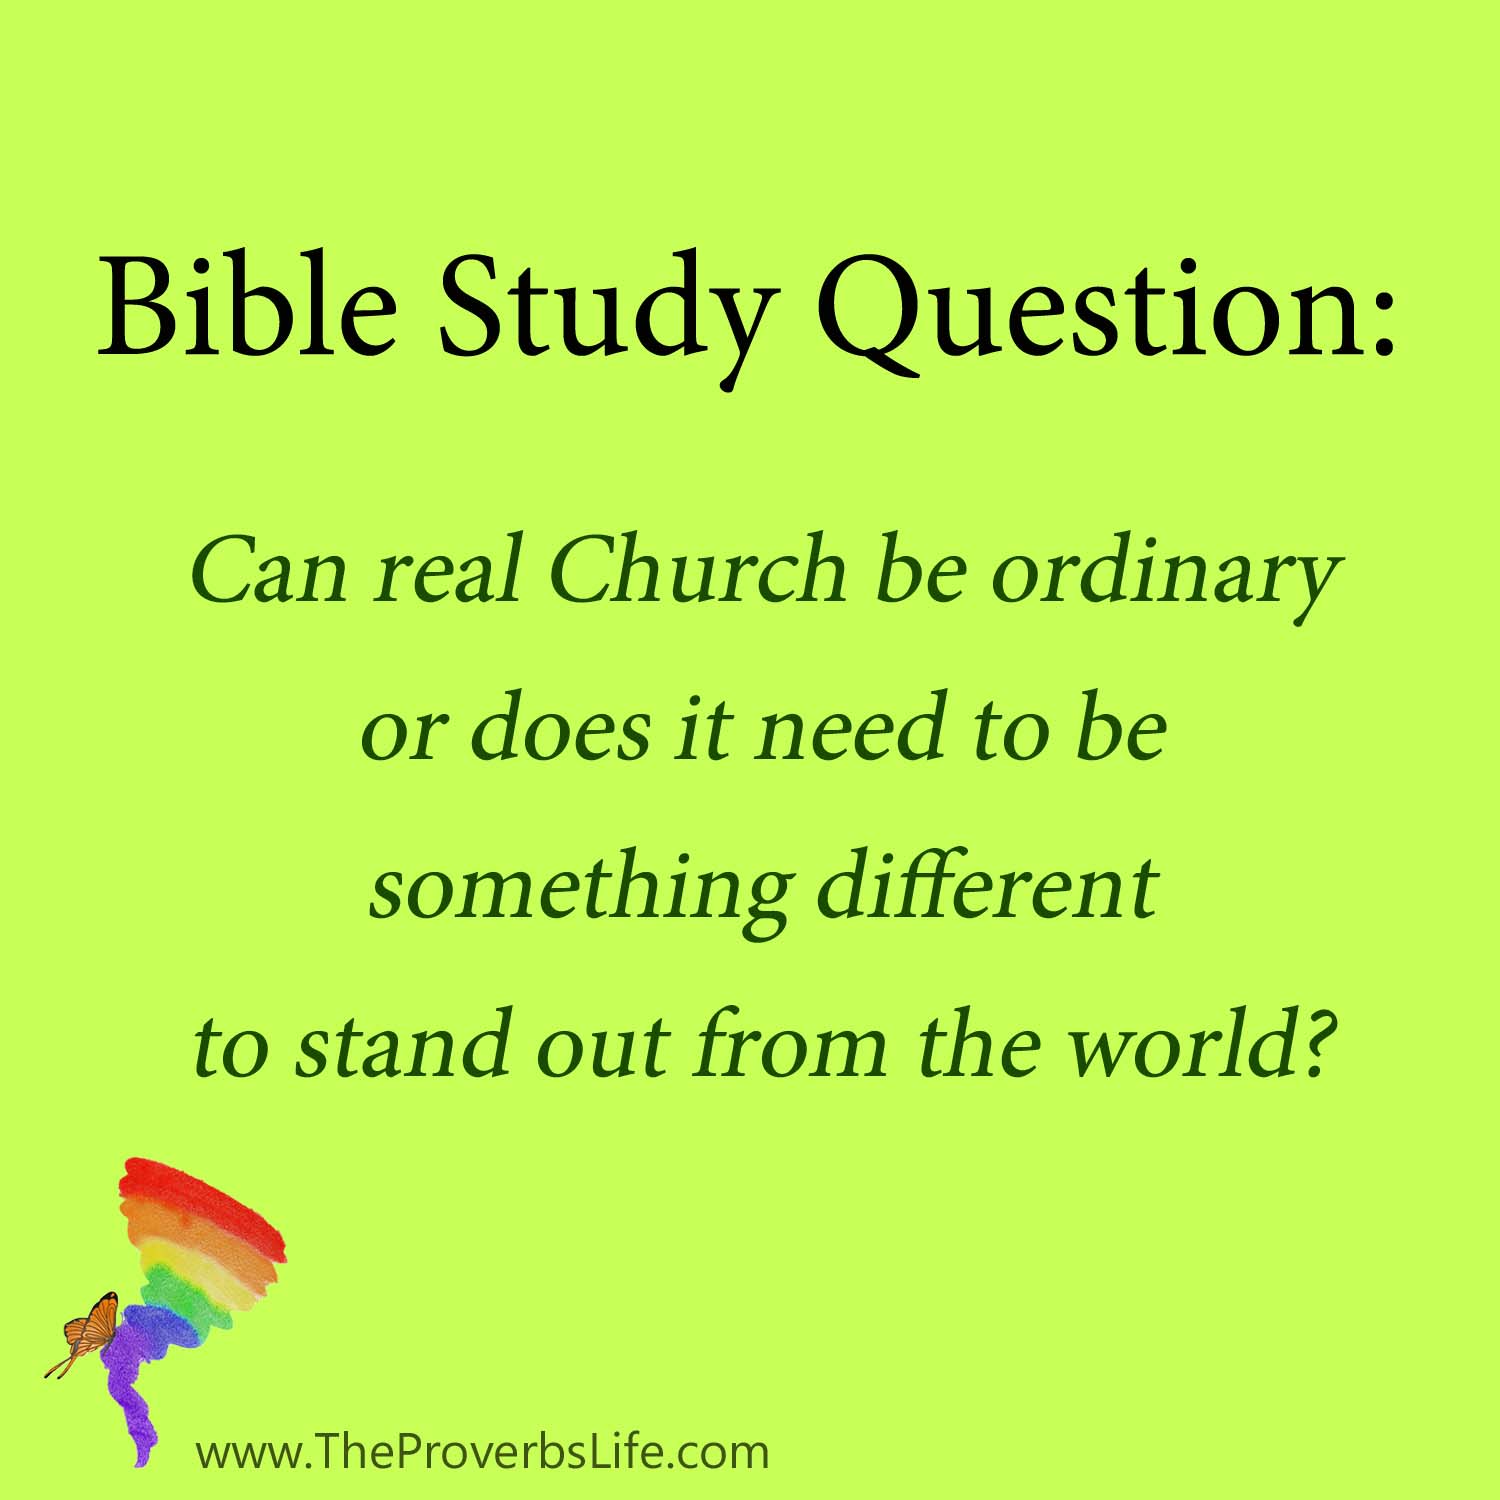 Bible Study Question - real church ordinary